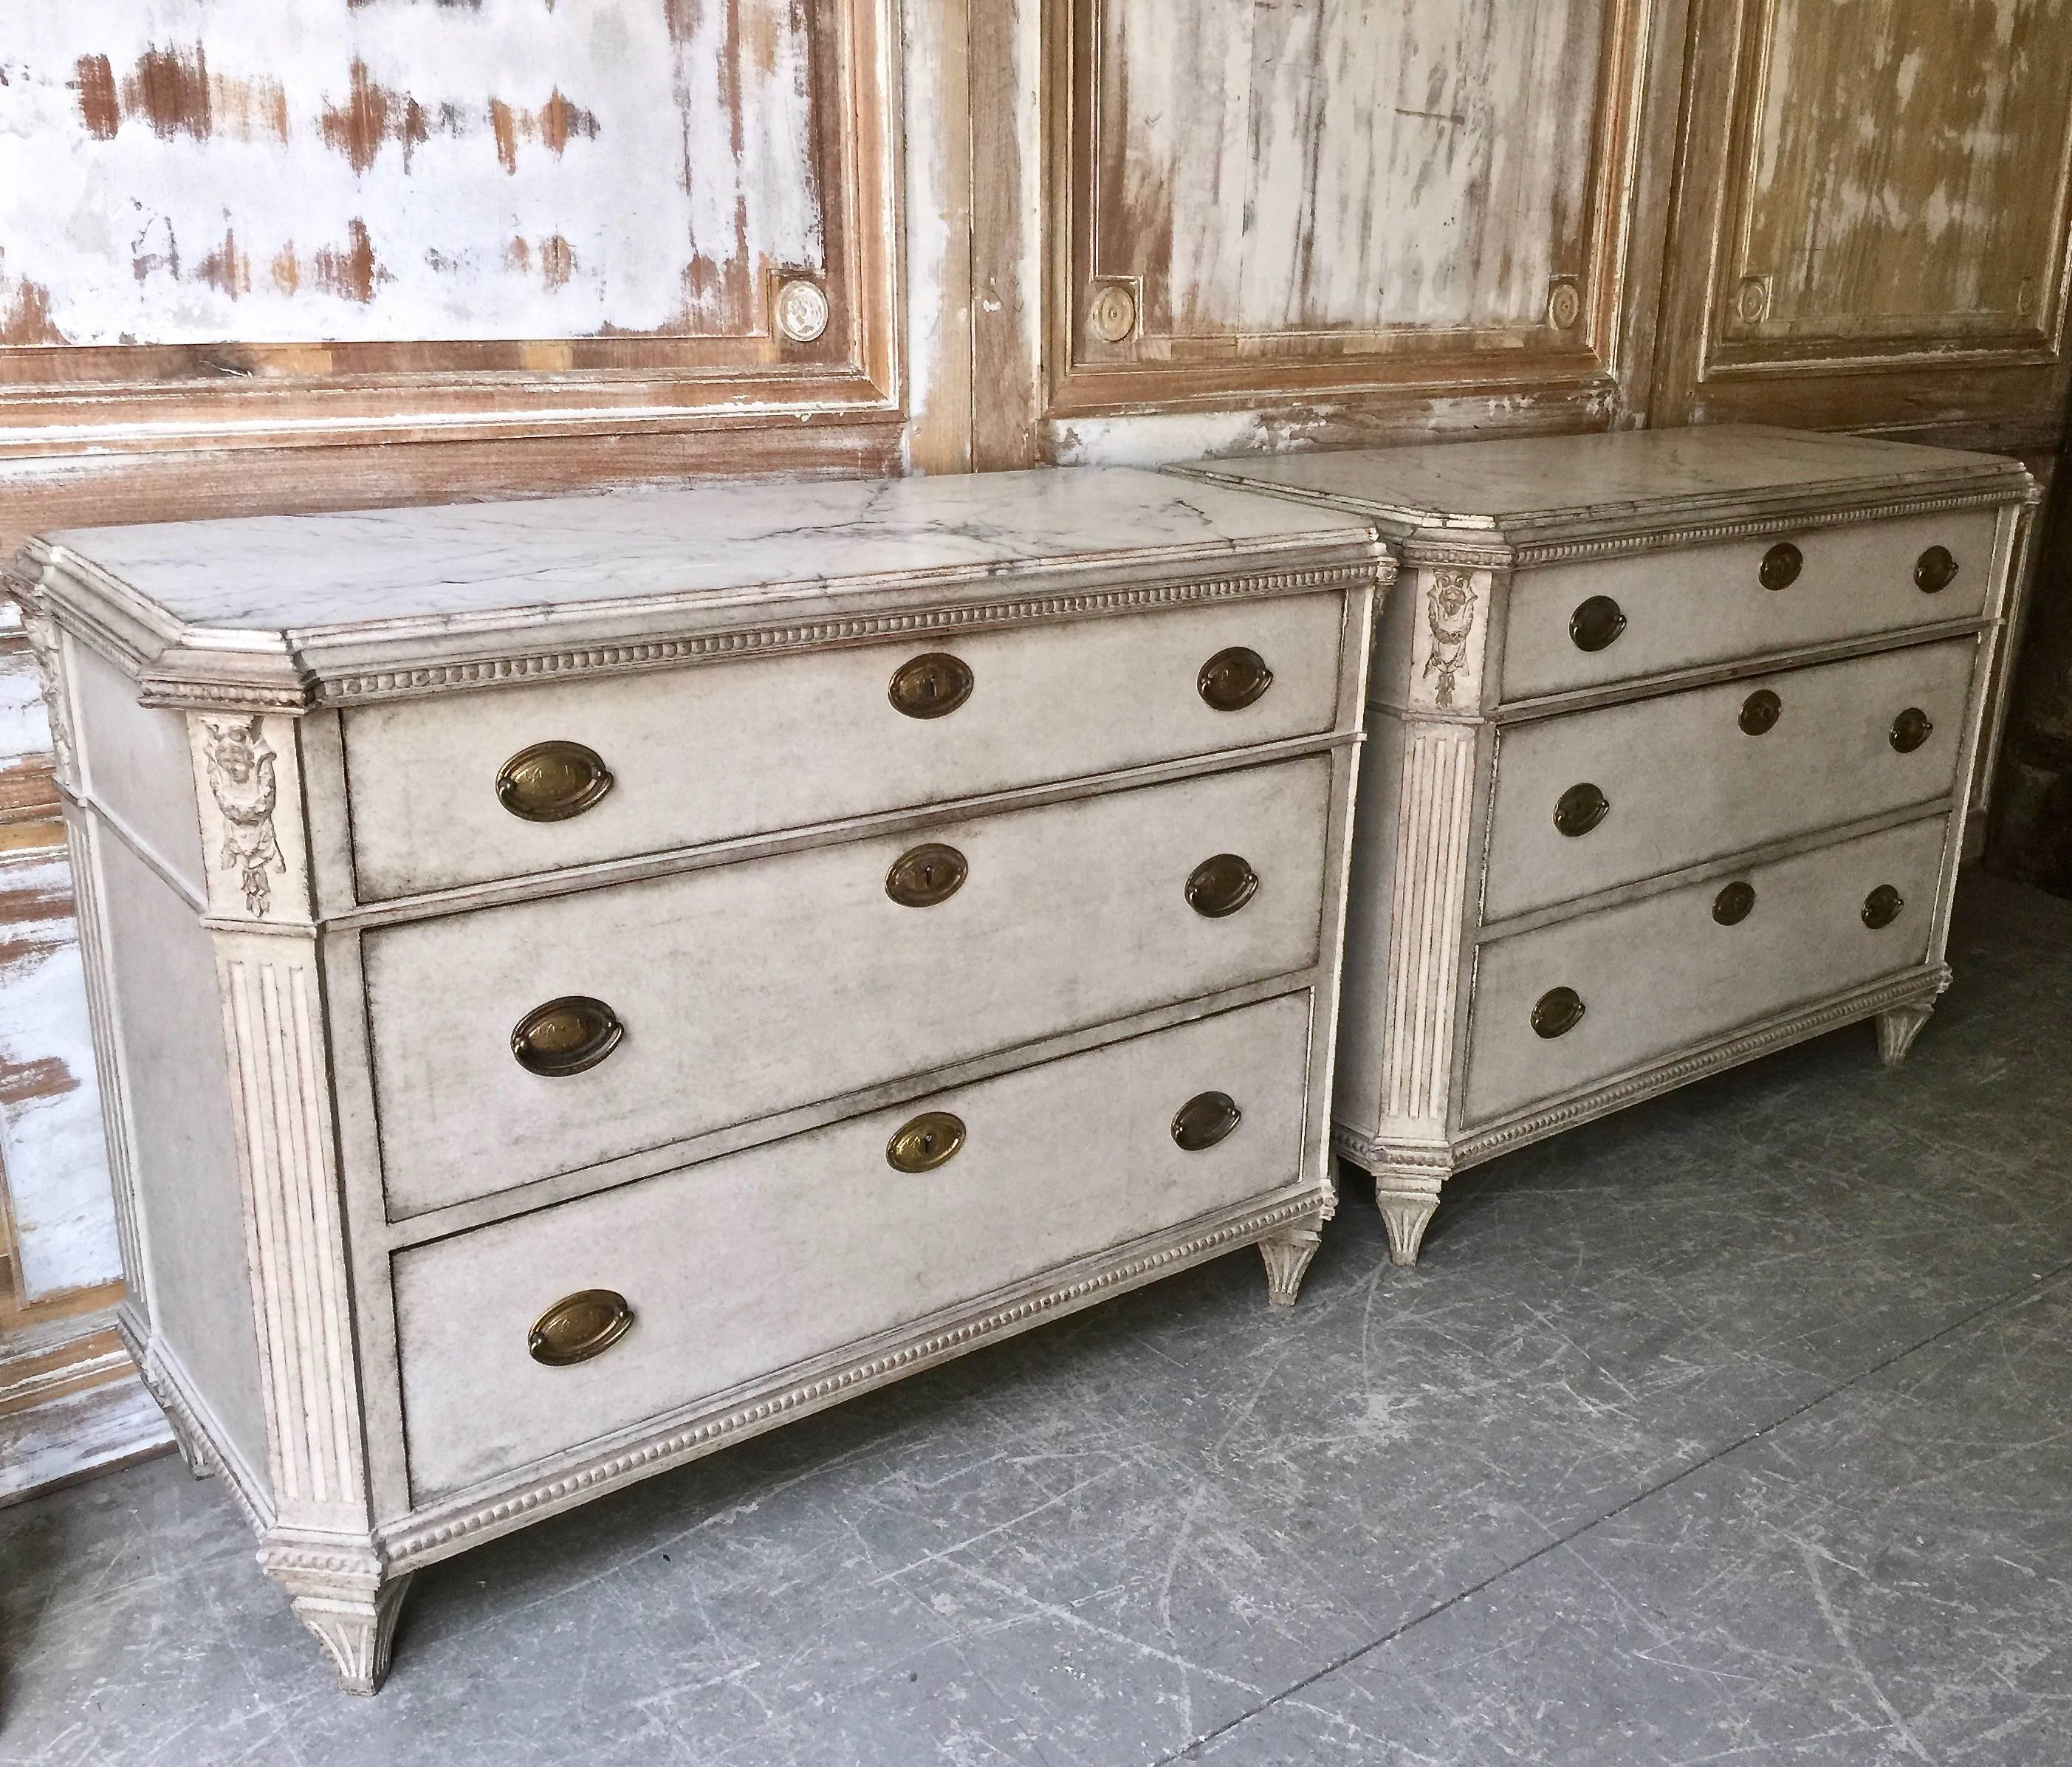 A very fine pair of 19th century, Swedish Gustavian Style chest of drawers with very handsome original hardware and exceptional figural carvings on each four reeded corner posts under the marblesized wood shaped top. A truly special pair of